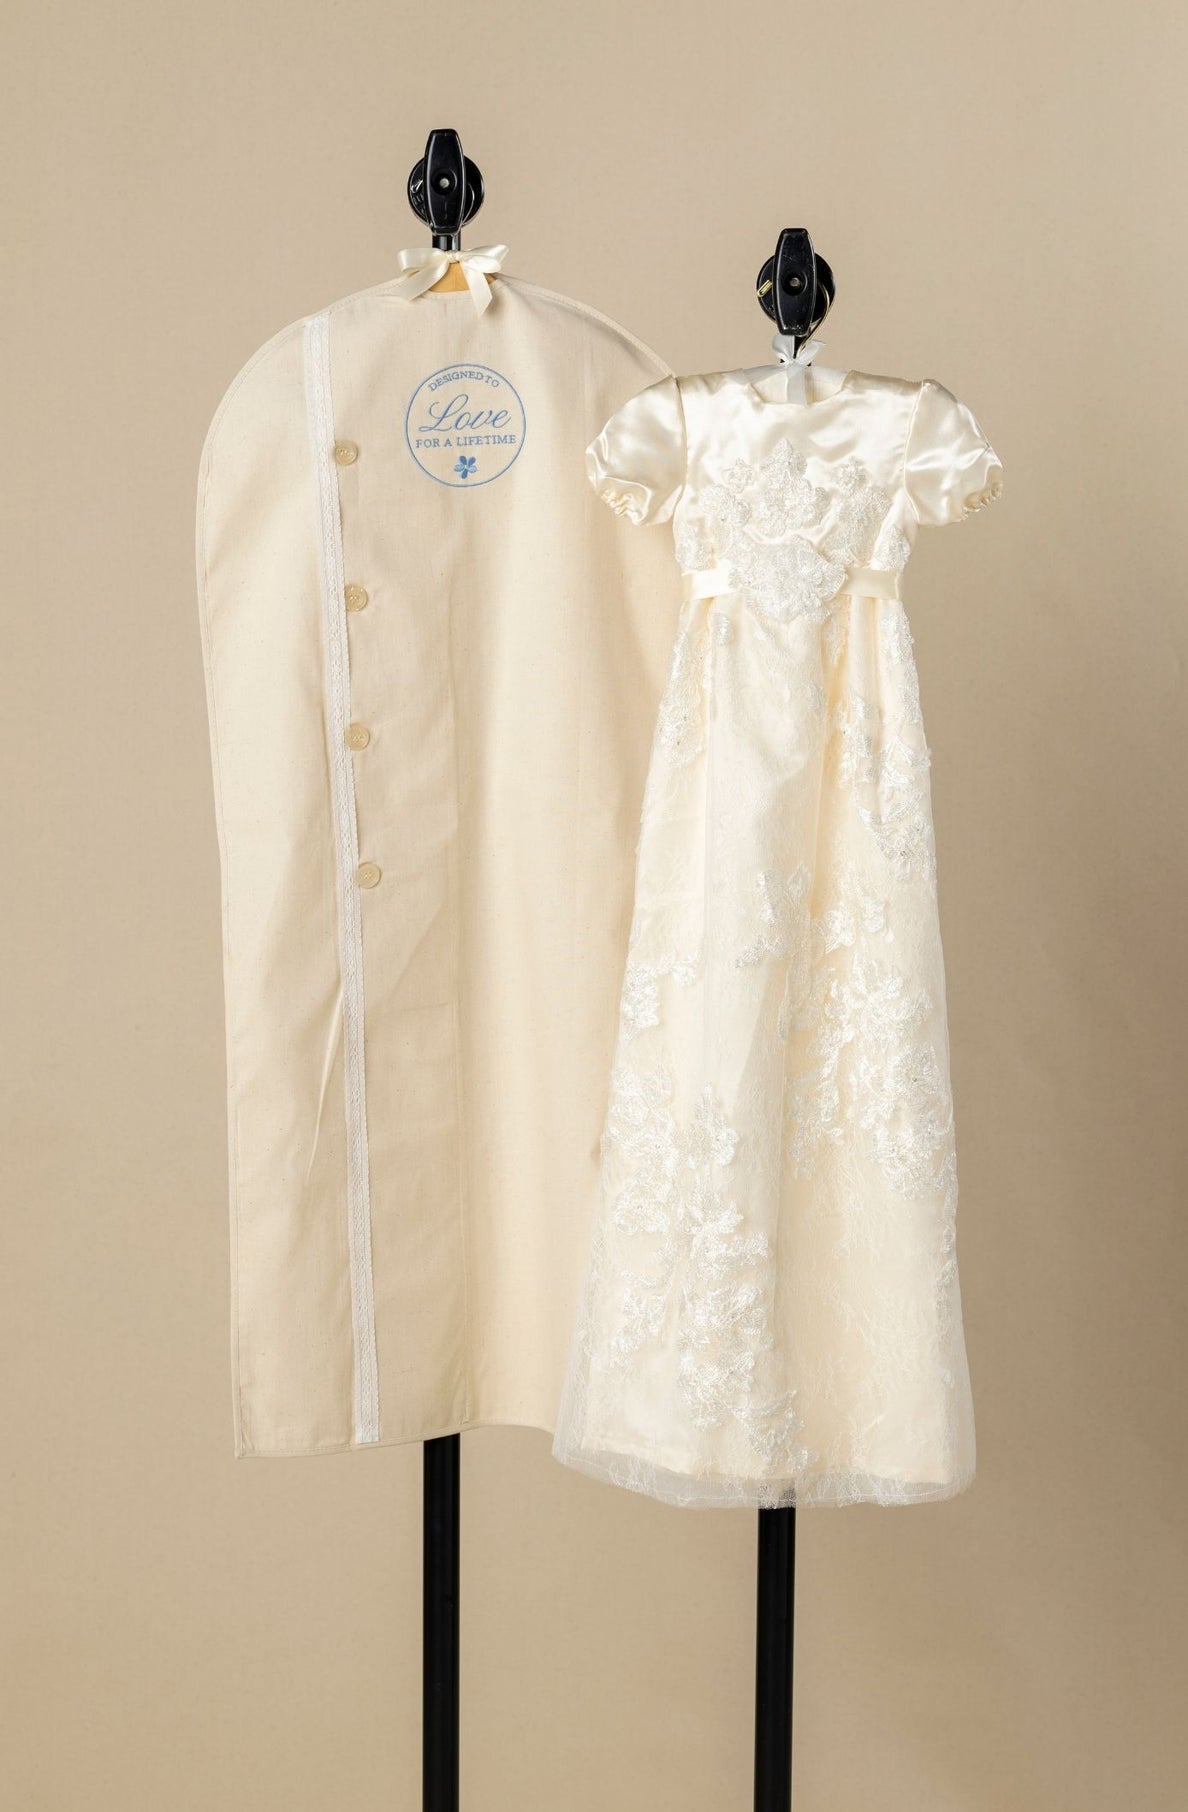 Cherish Christening Gown Embroidered Garment Bag with Padded Hanger